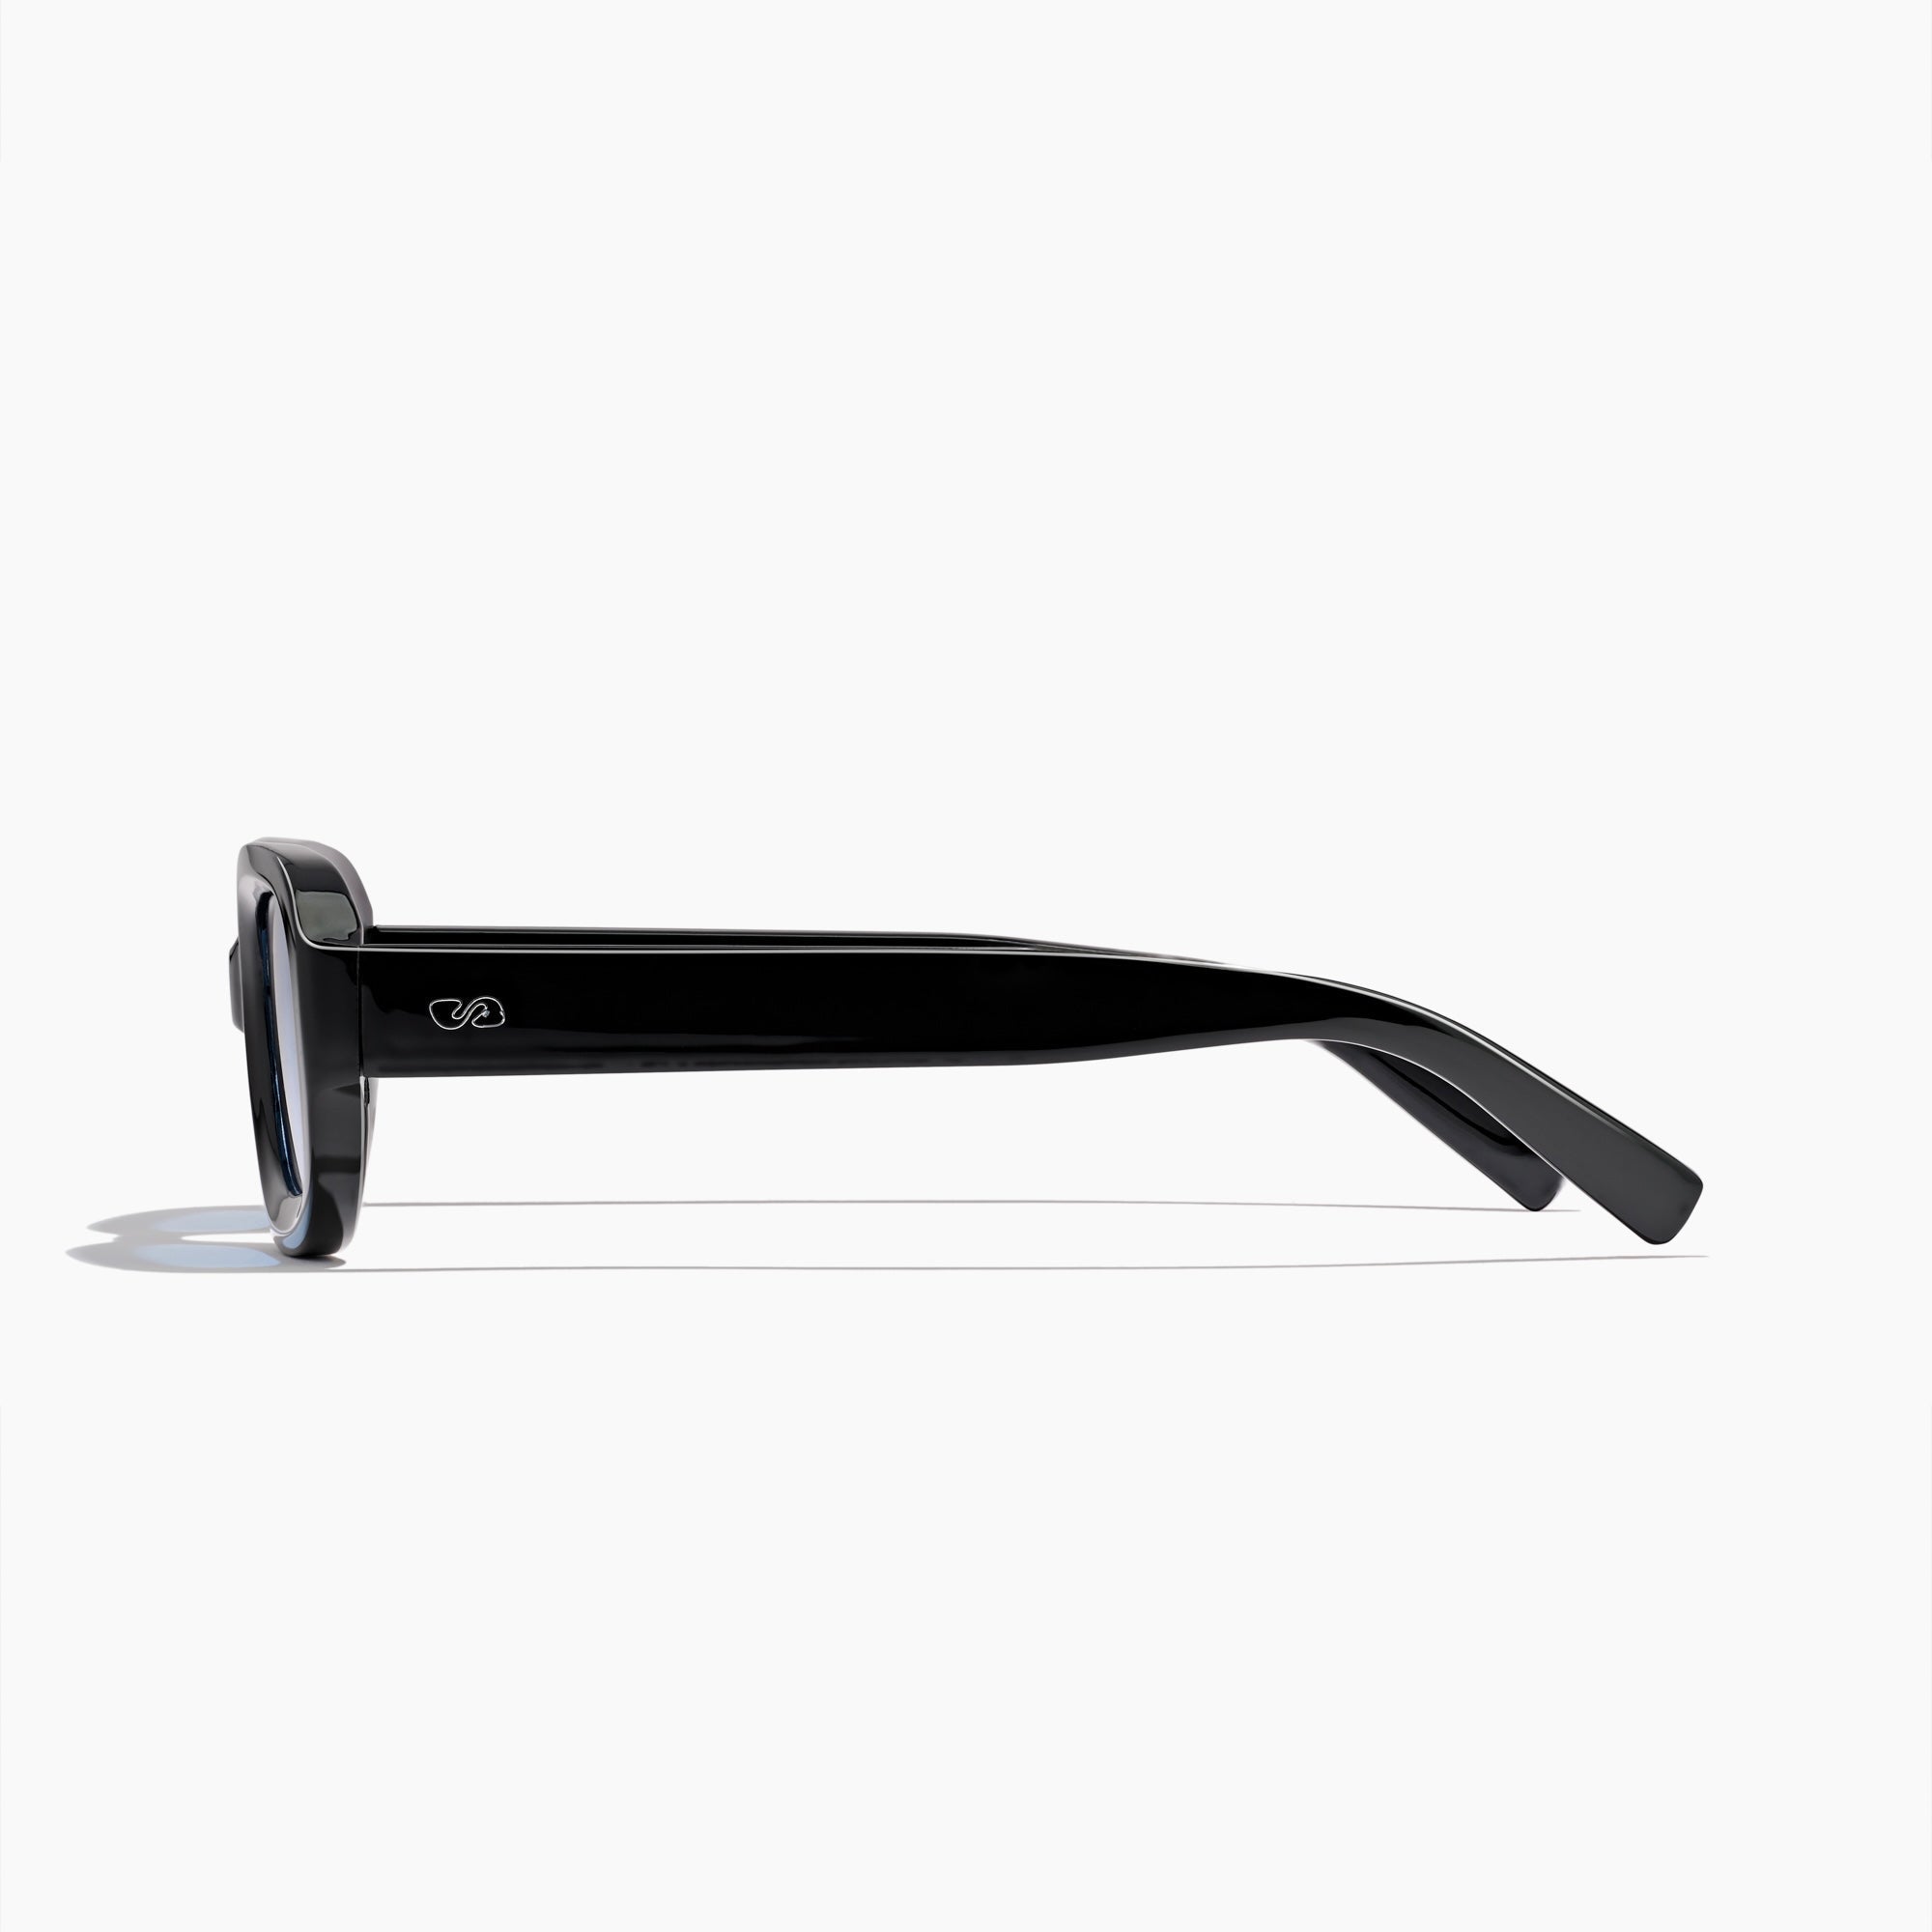 SOHO Sunglasses in black and prussian - Szade - State Of Flux